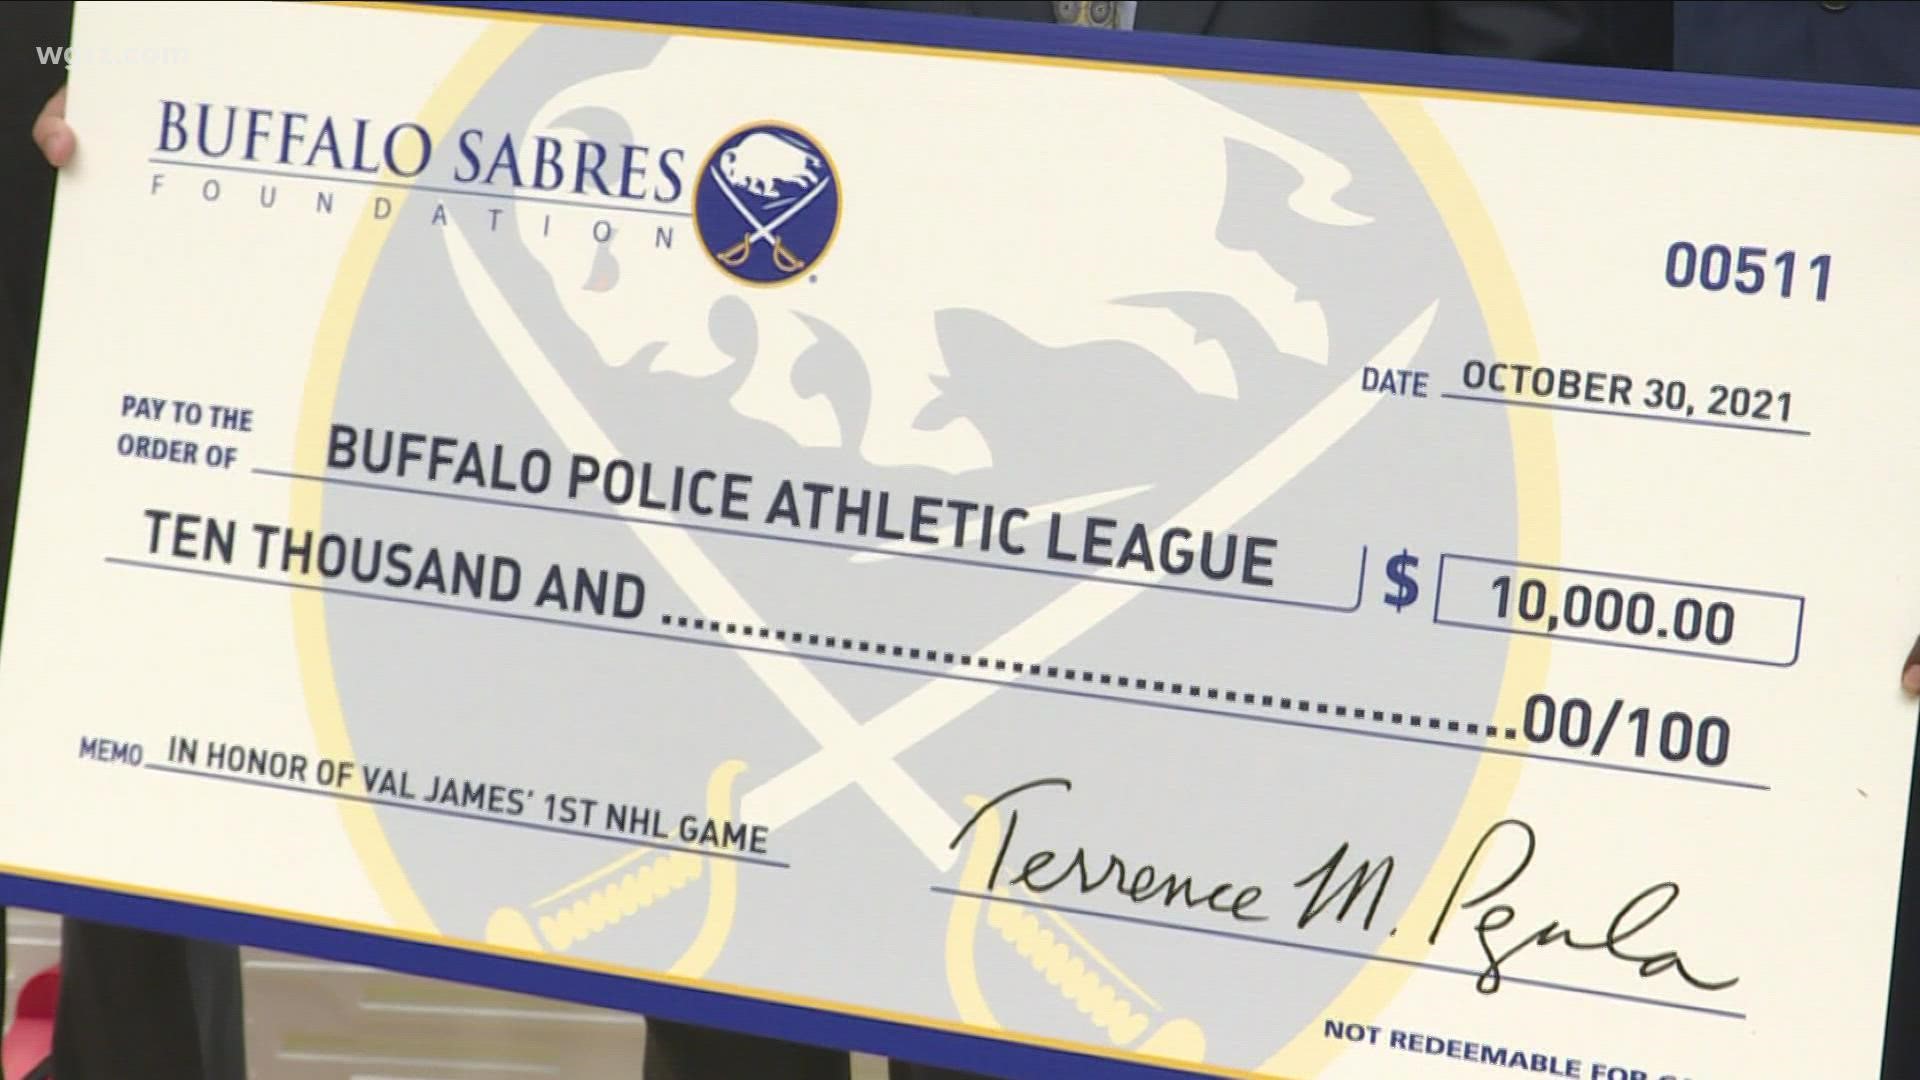 Highmark Blue Cross Blue Shield and the Sabres donated $10 thousand to the organization which help to build a portable ice rink at Hennepin Community Center.